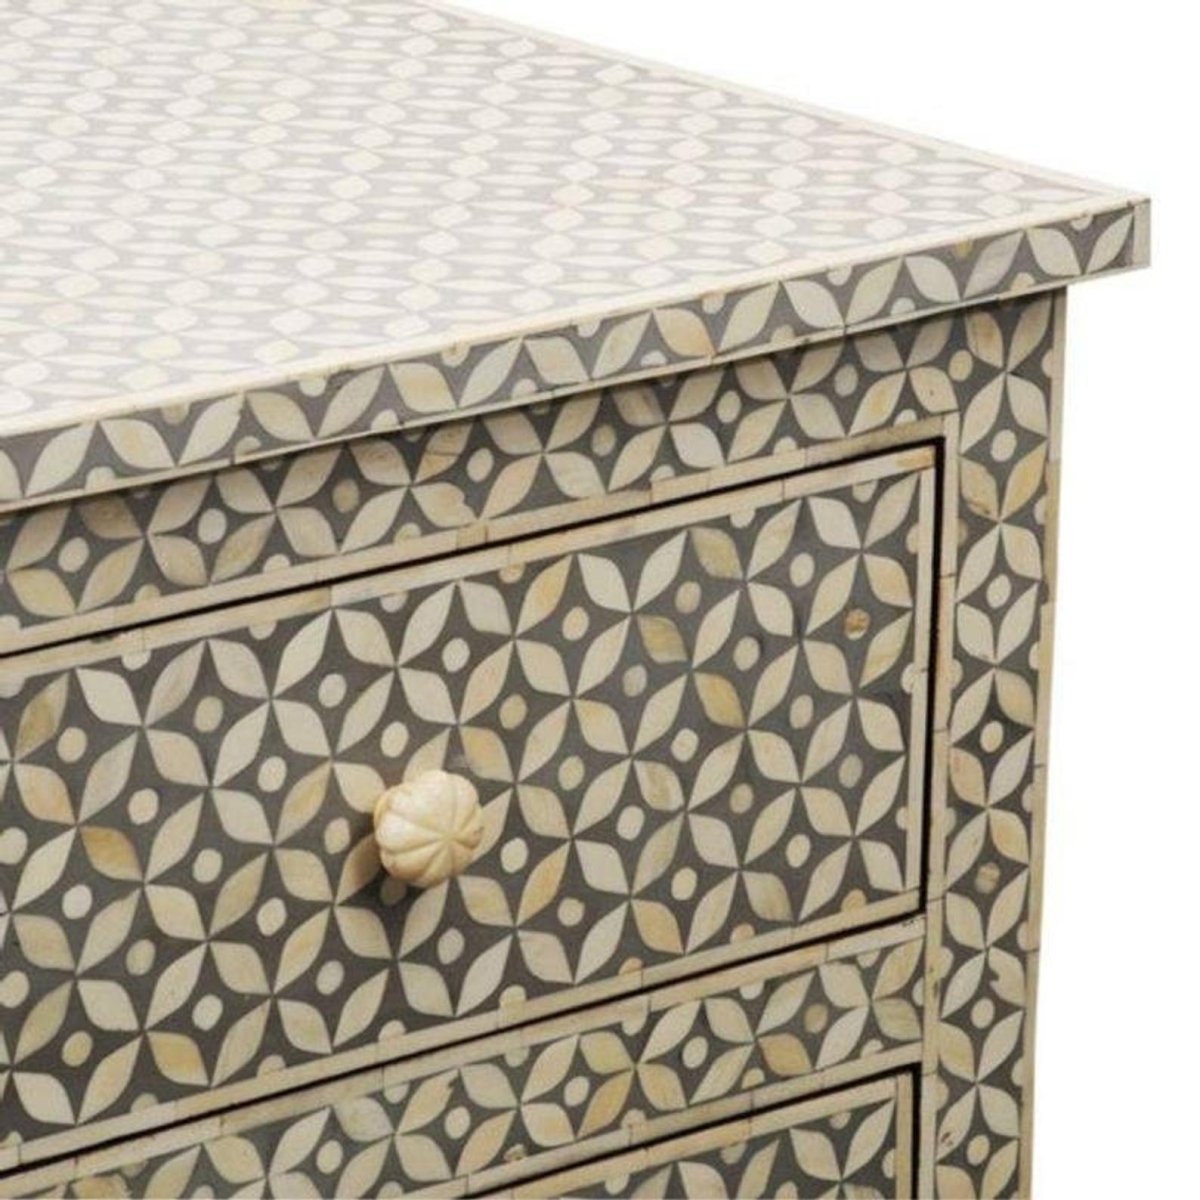 Bone Inlay Chest of 4 Drawers in Grey Color | Handmade Dresser chest of drawer - Bone Inlay Furnitures